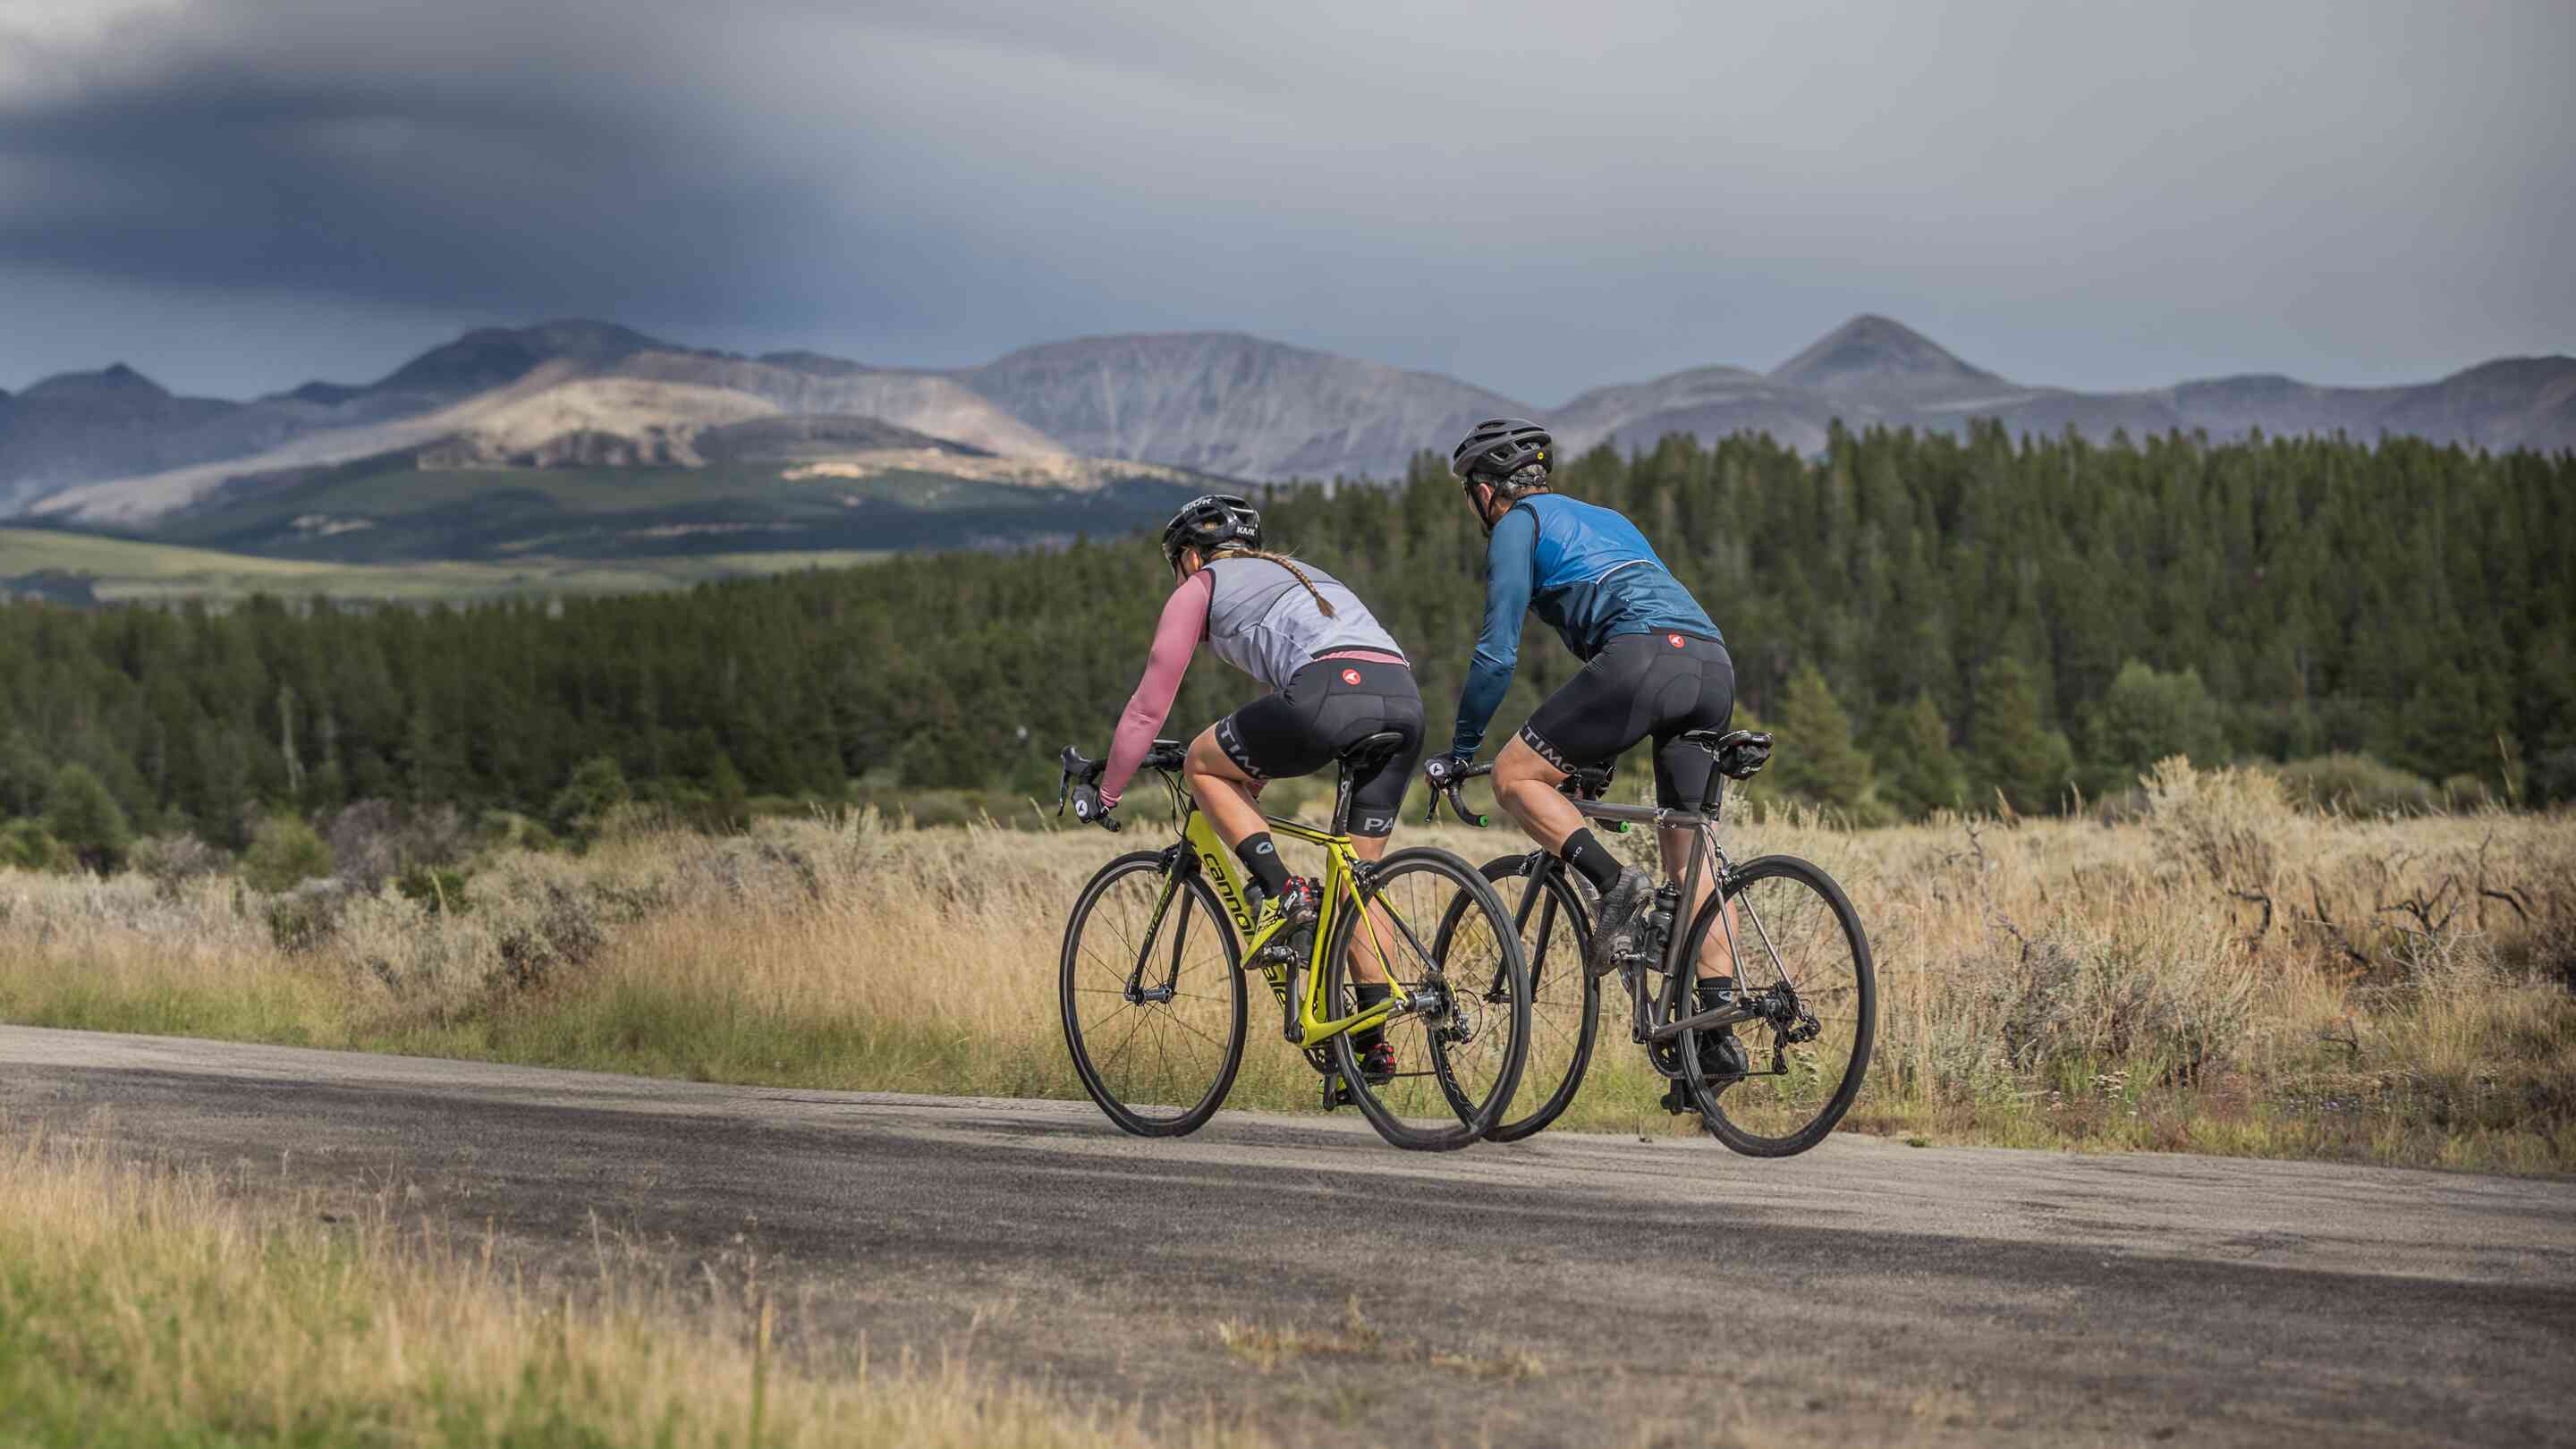 5 Tips to Get a Friend into Cycling